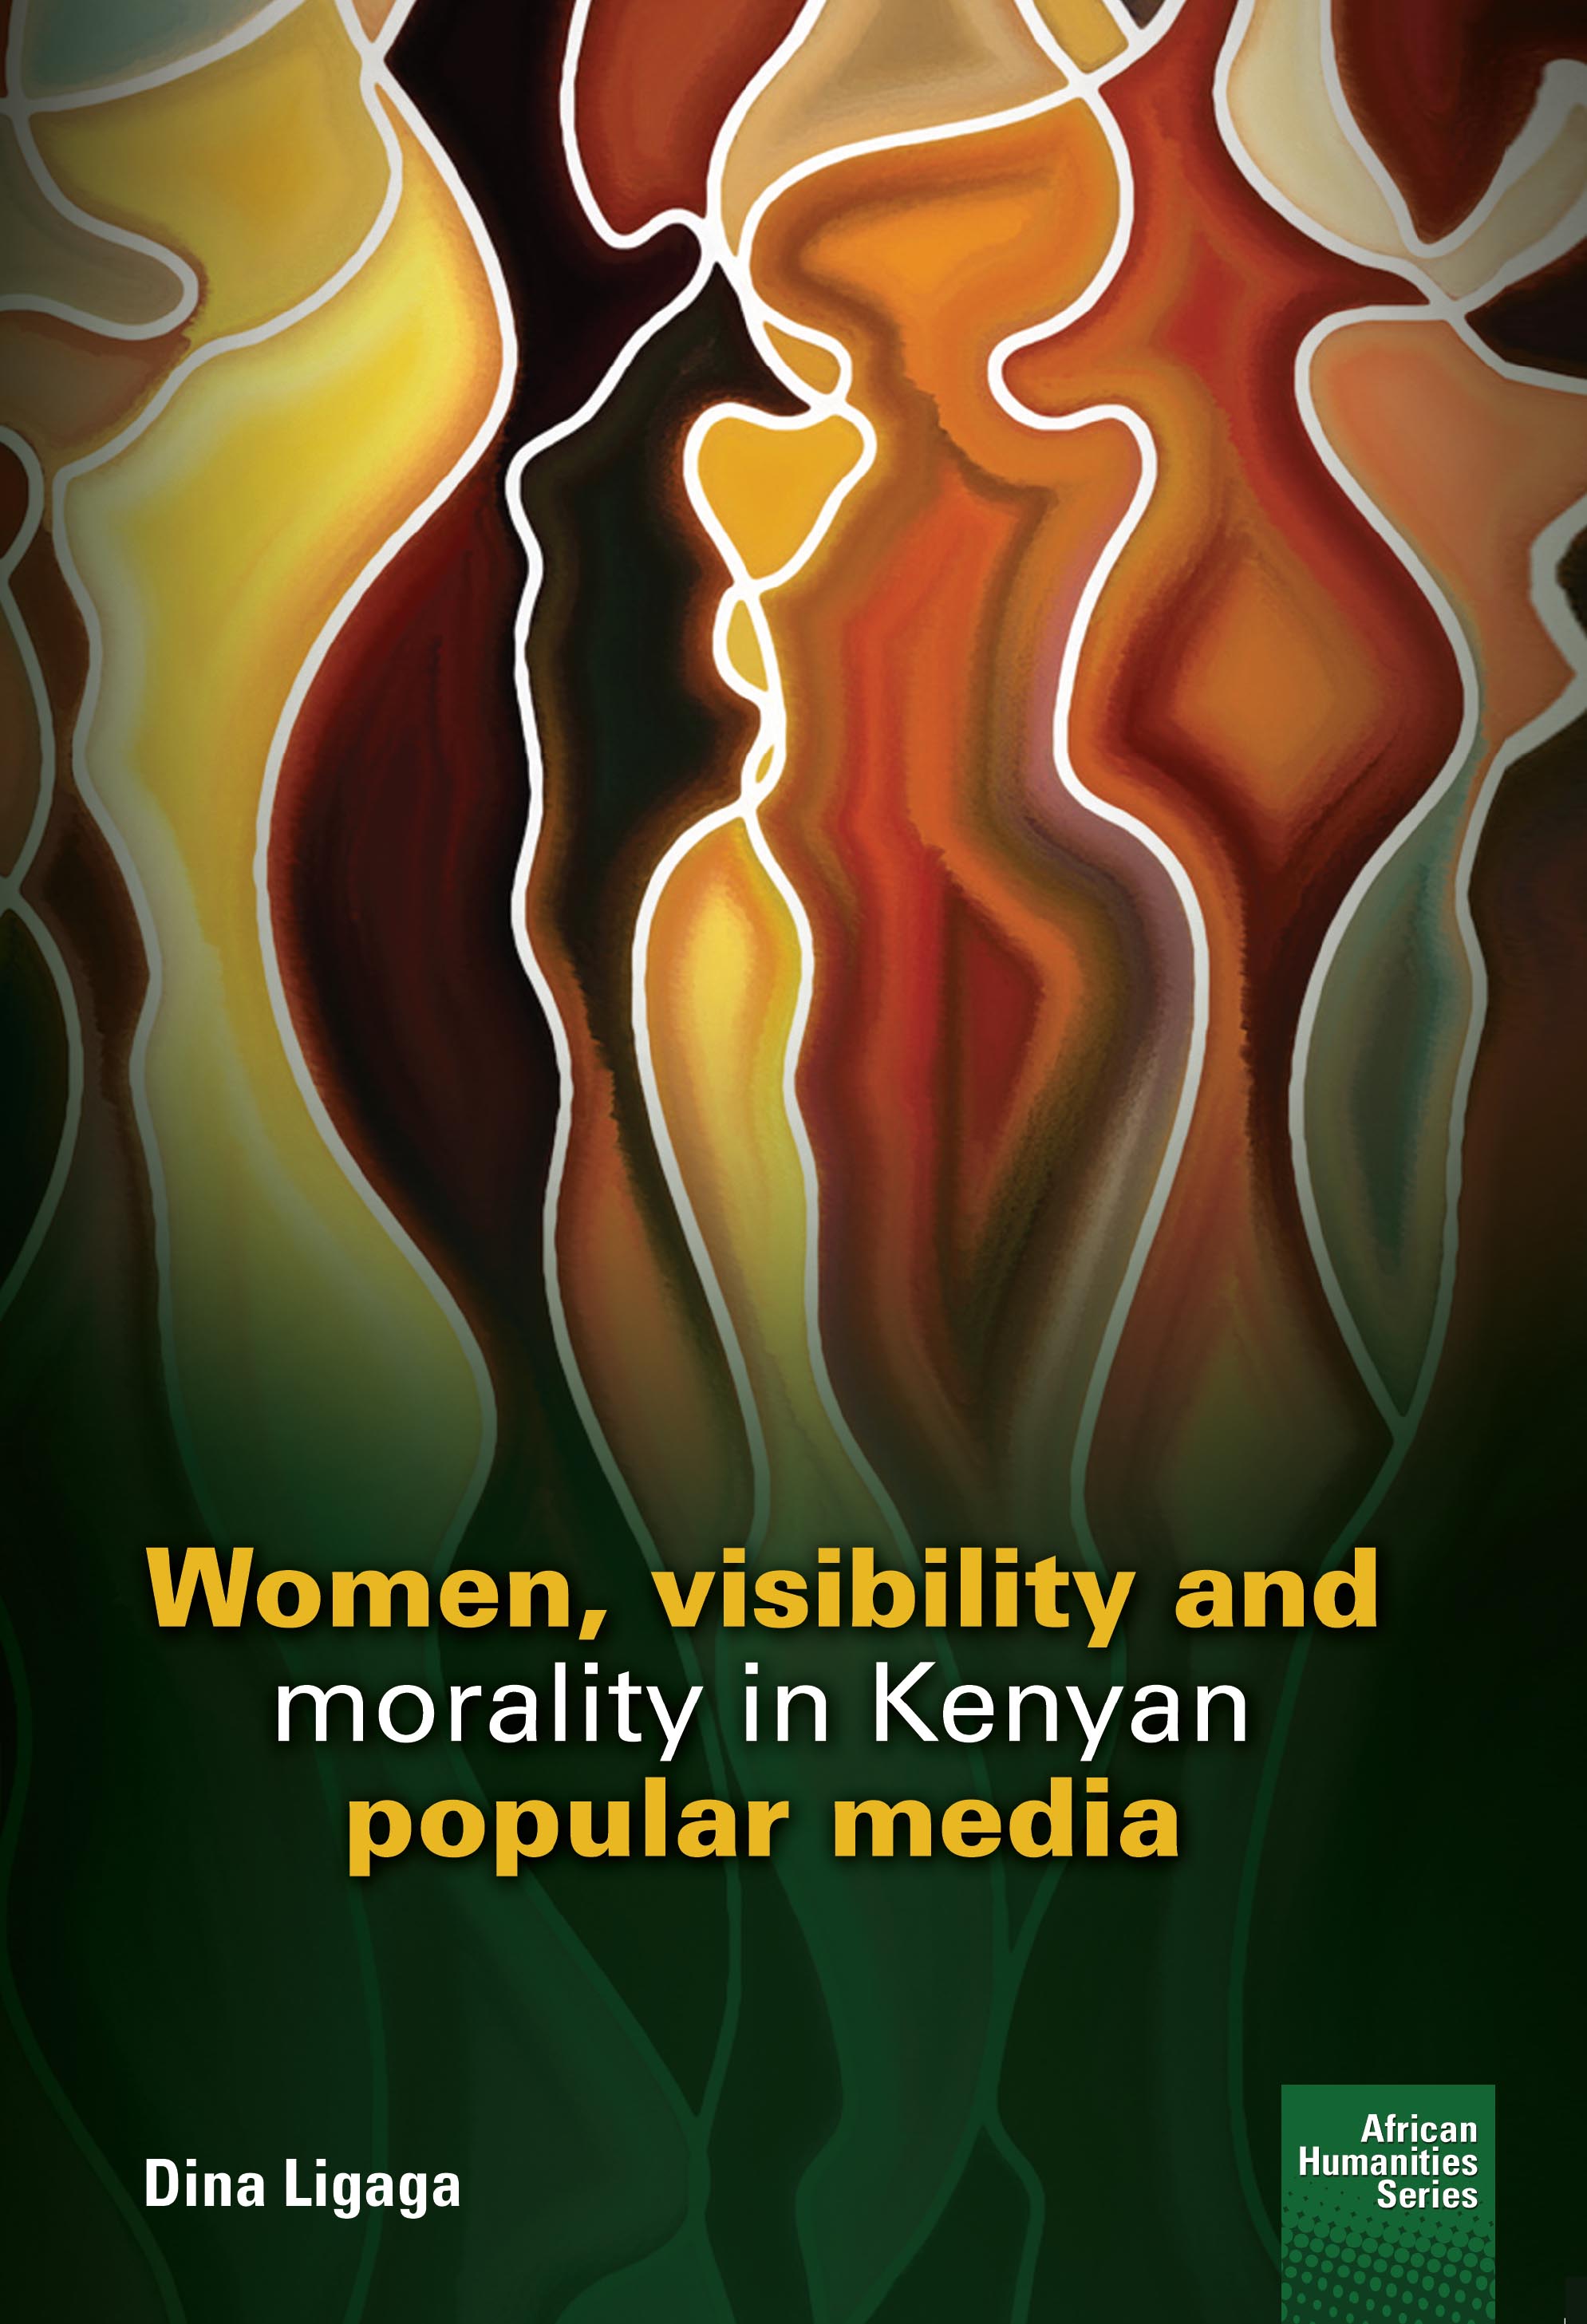 Women--visibility-and-morality-in-Kenyan-popular-media